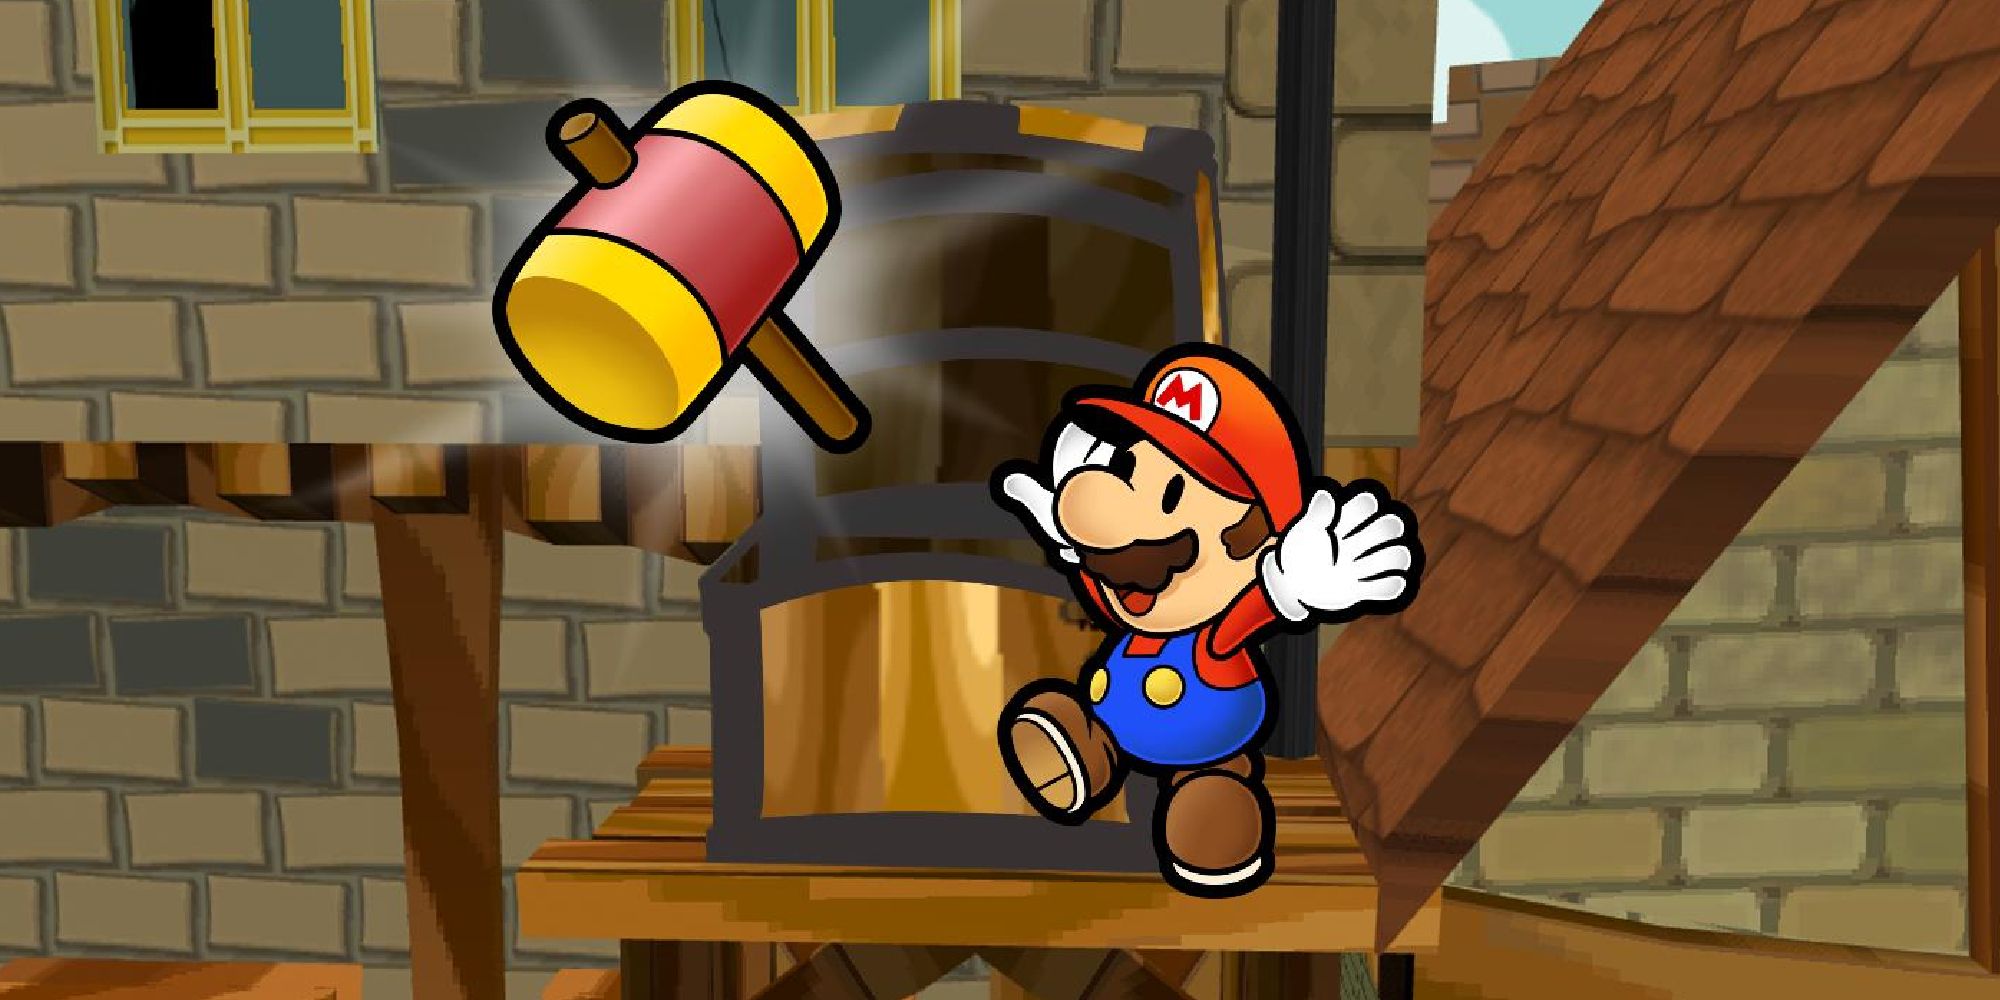 Paper Mario receiving a Hammer from a treasure chest in The Thousand Year Door